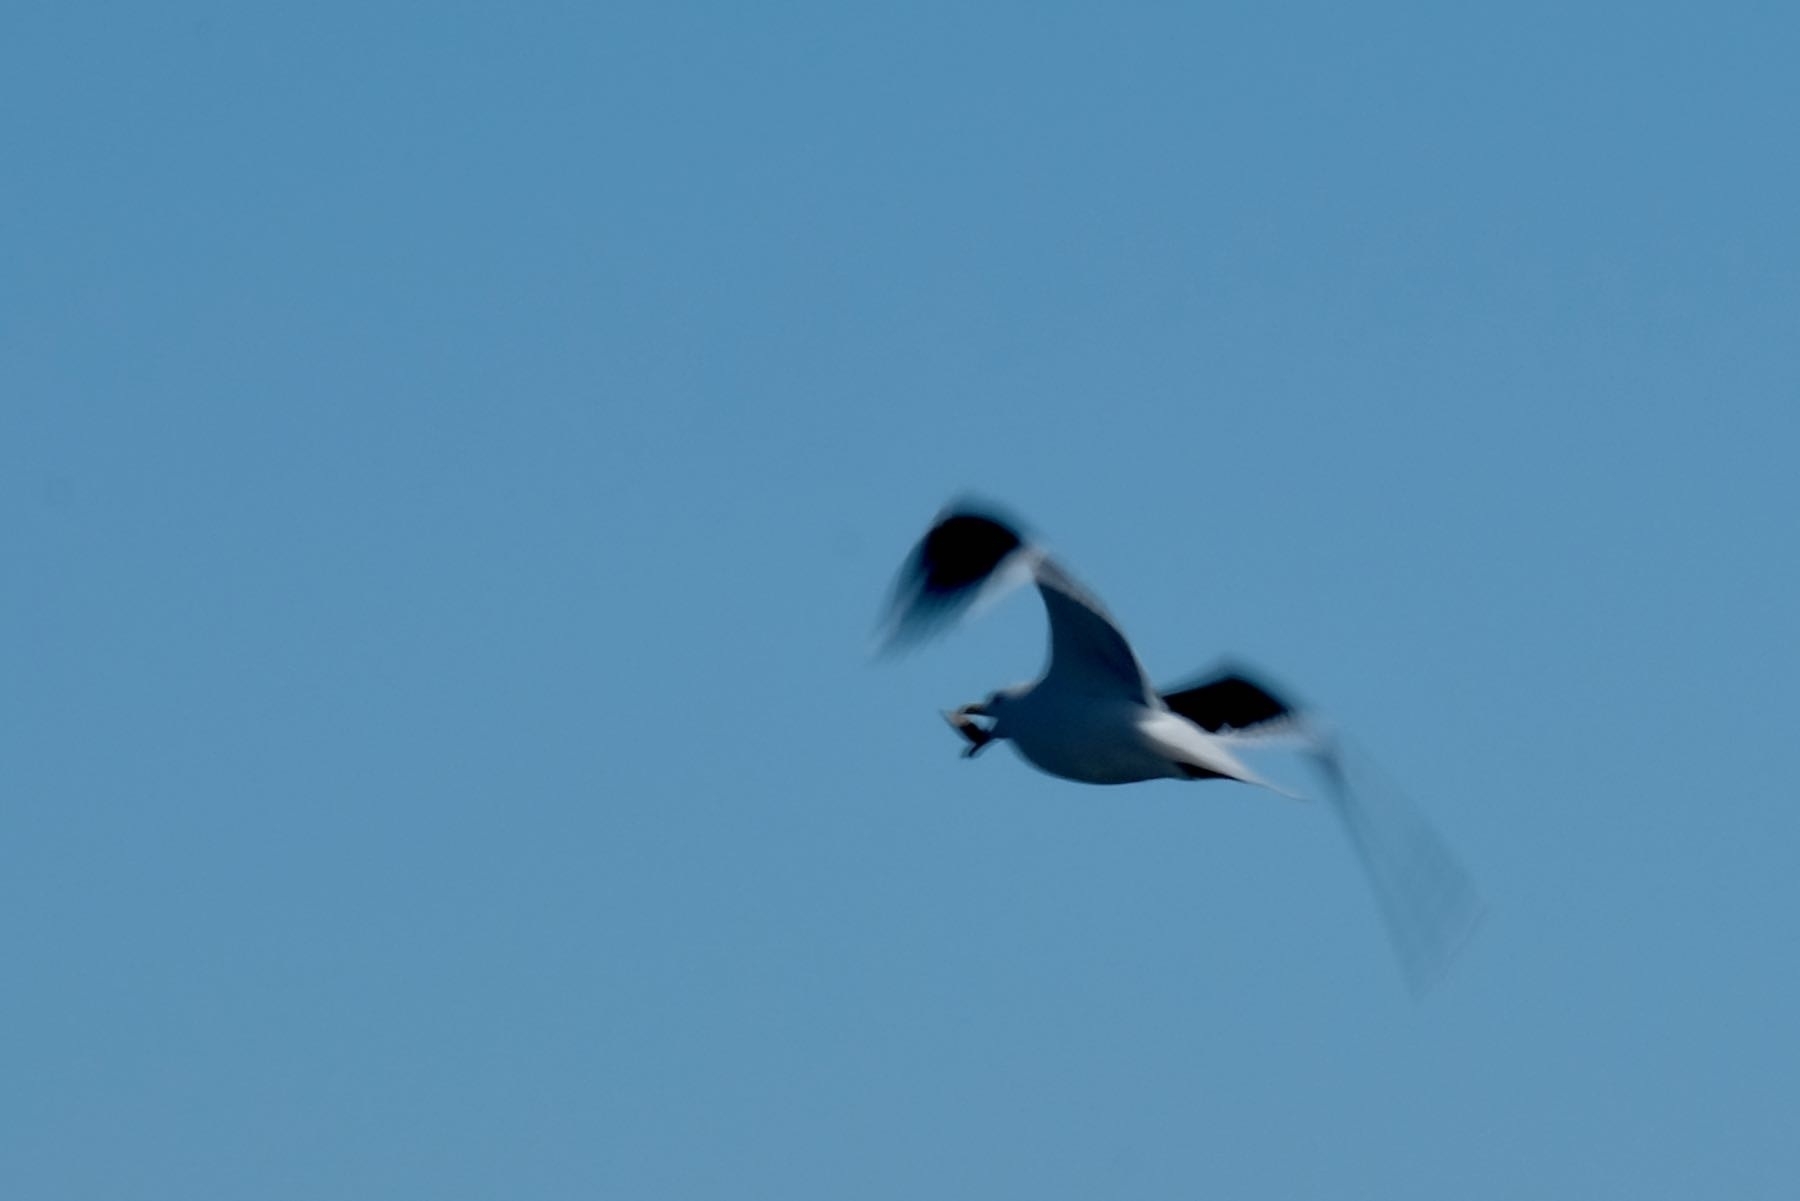 Gull flying with bivalve in its beak. 